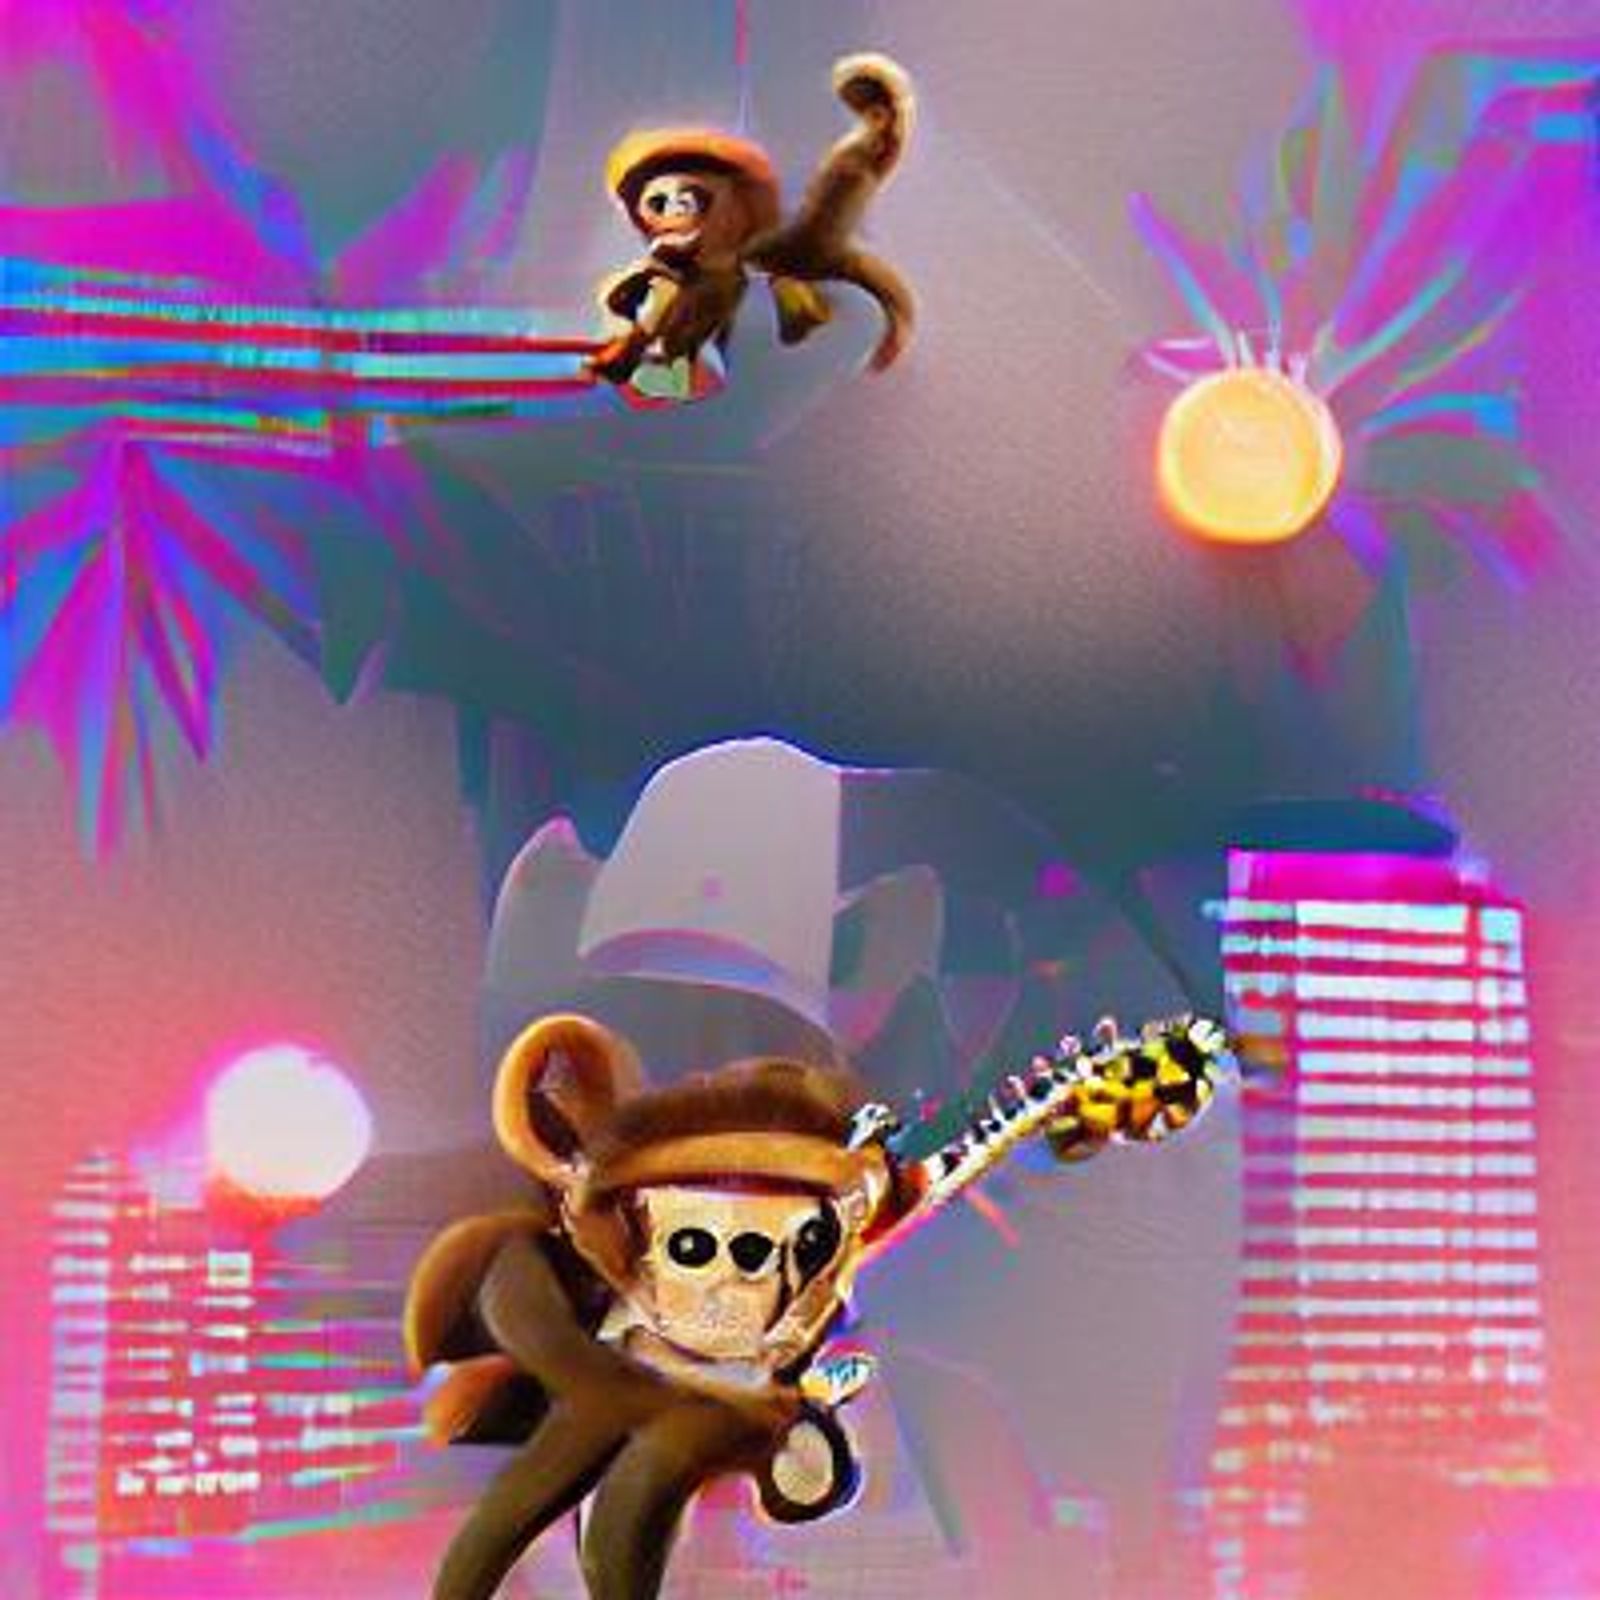 rock star monkey clipart png